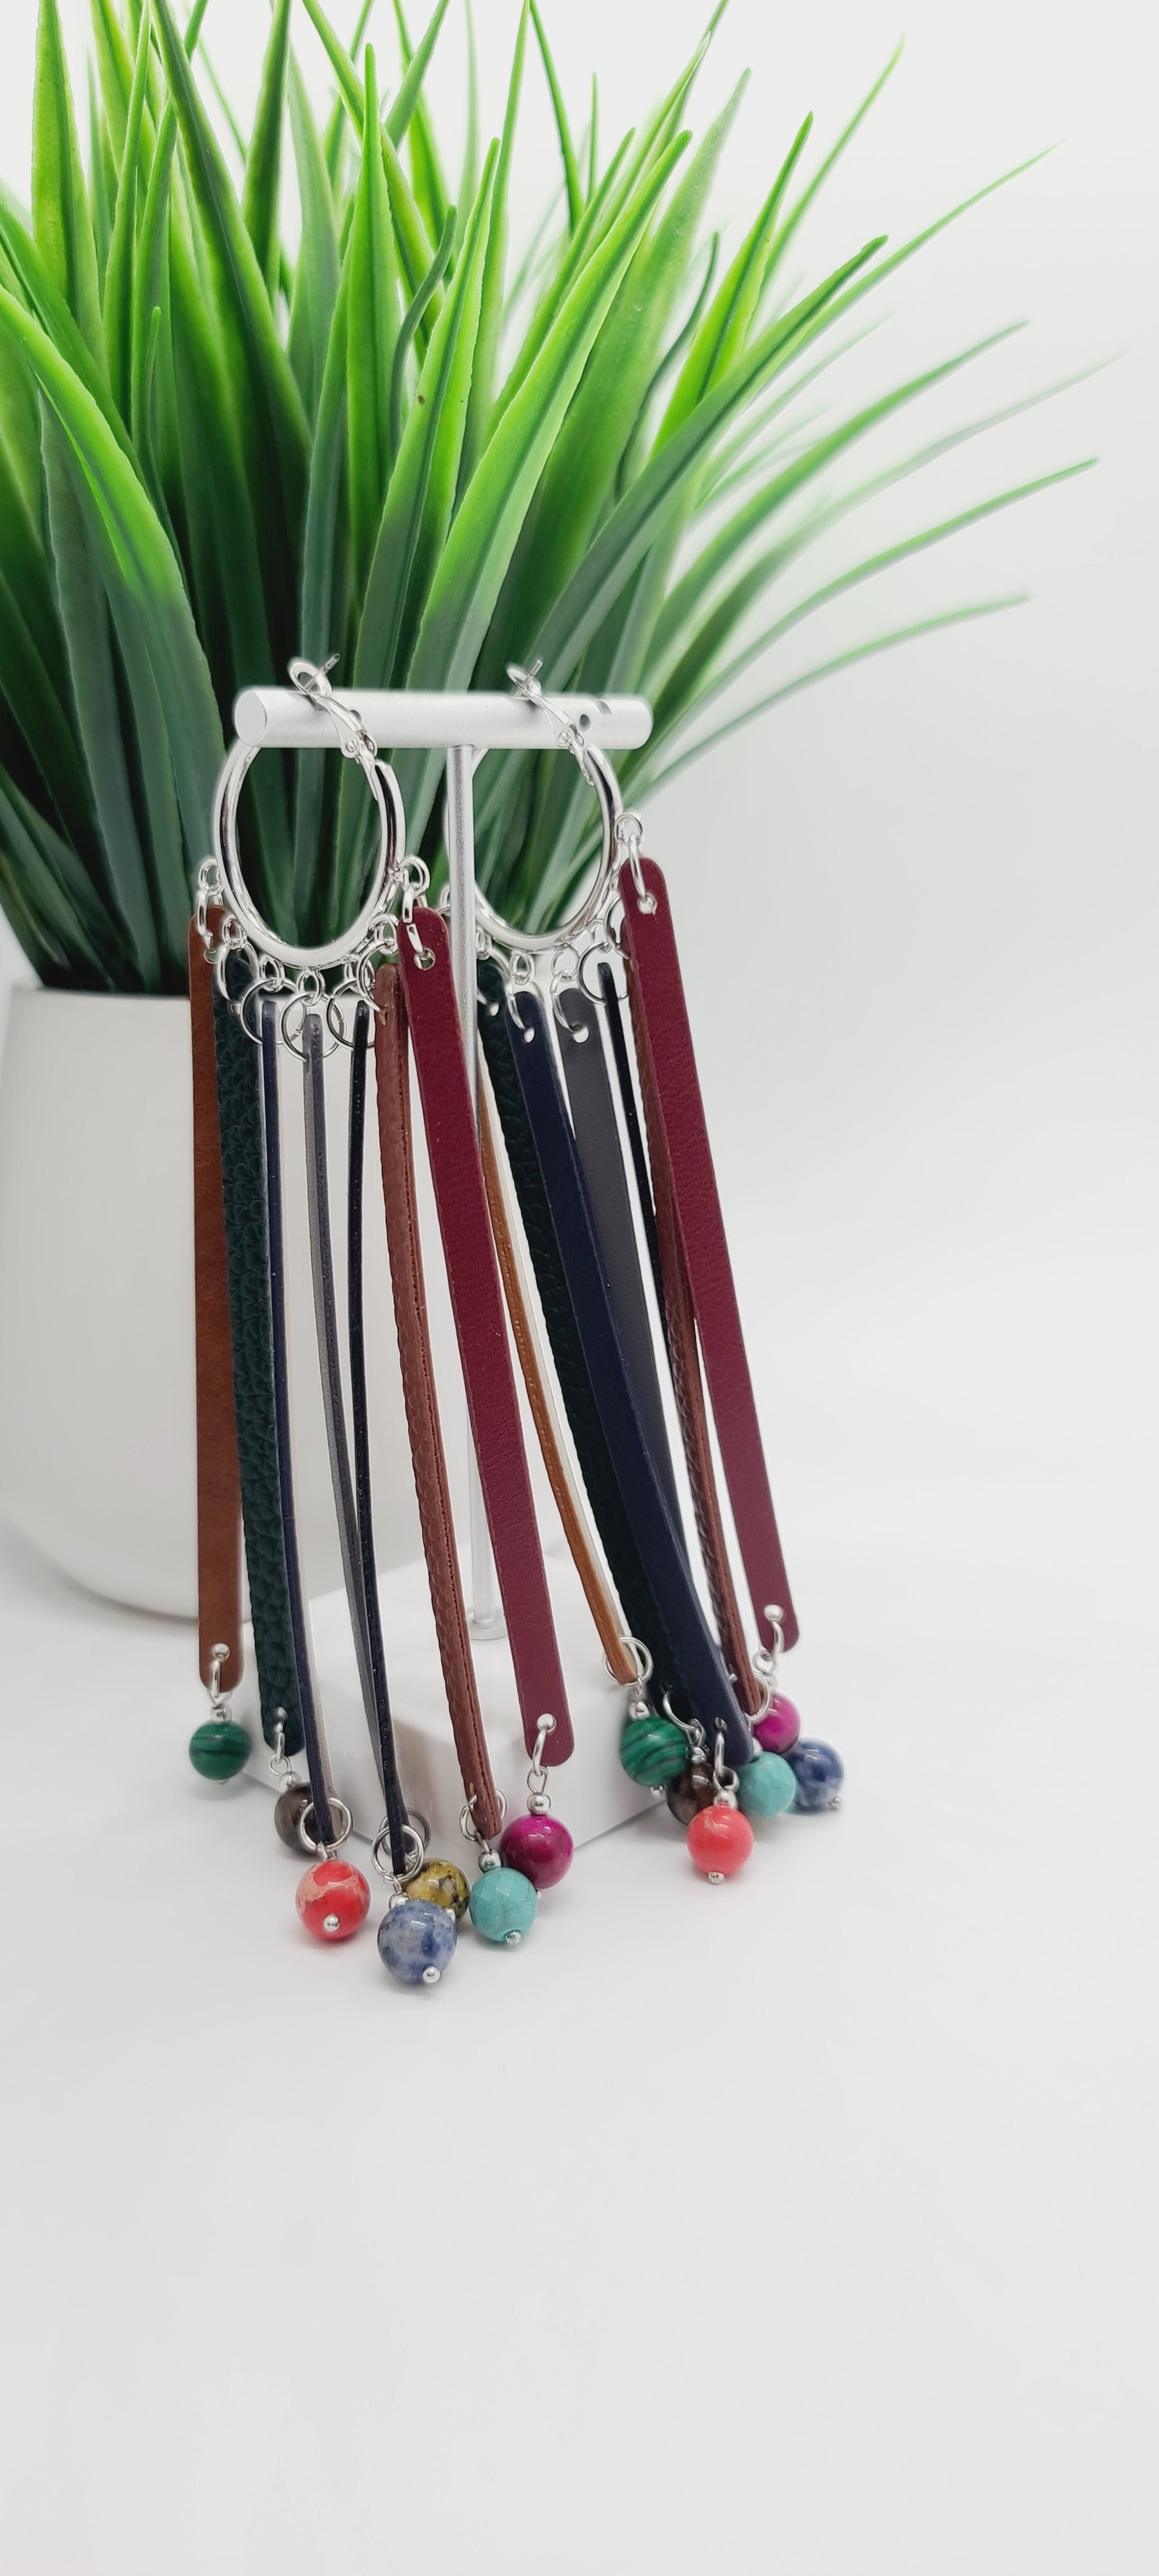 Length: 6 inches | Weight: 1 ounce  Distinctly You! These earrings are made with silver hoops, faux leather tassels, 10mm gem stones.